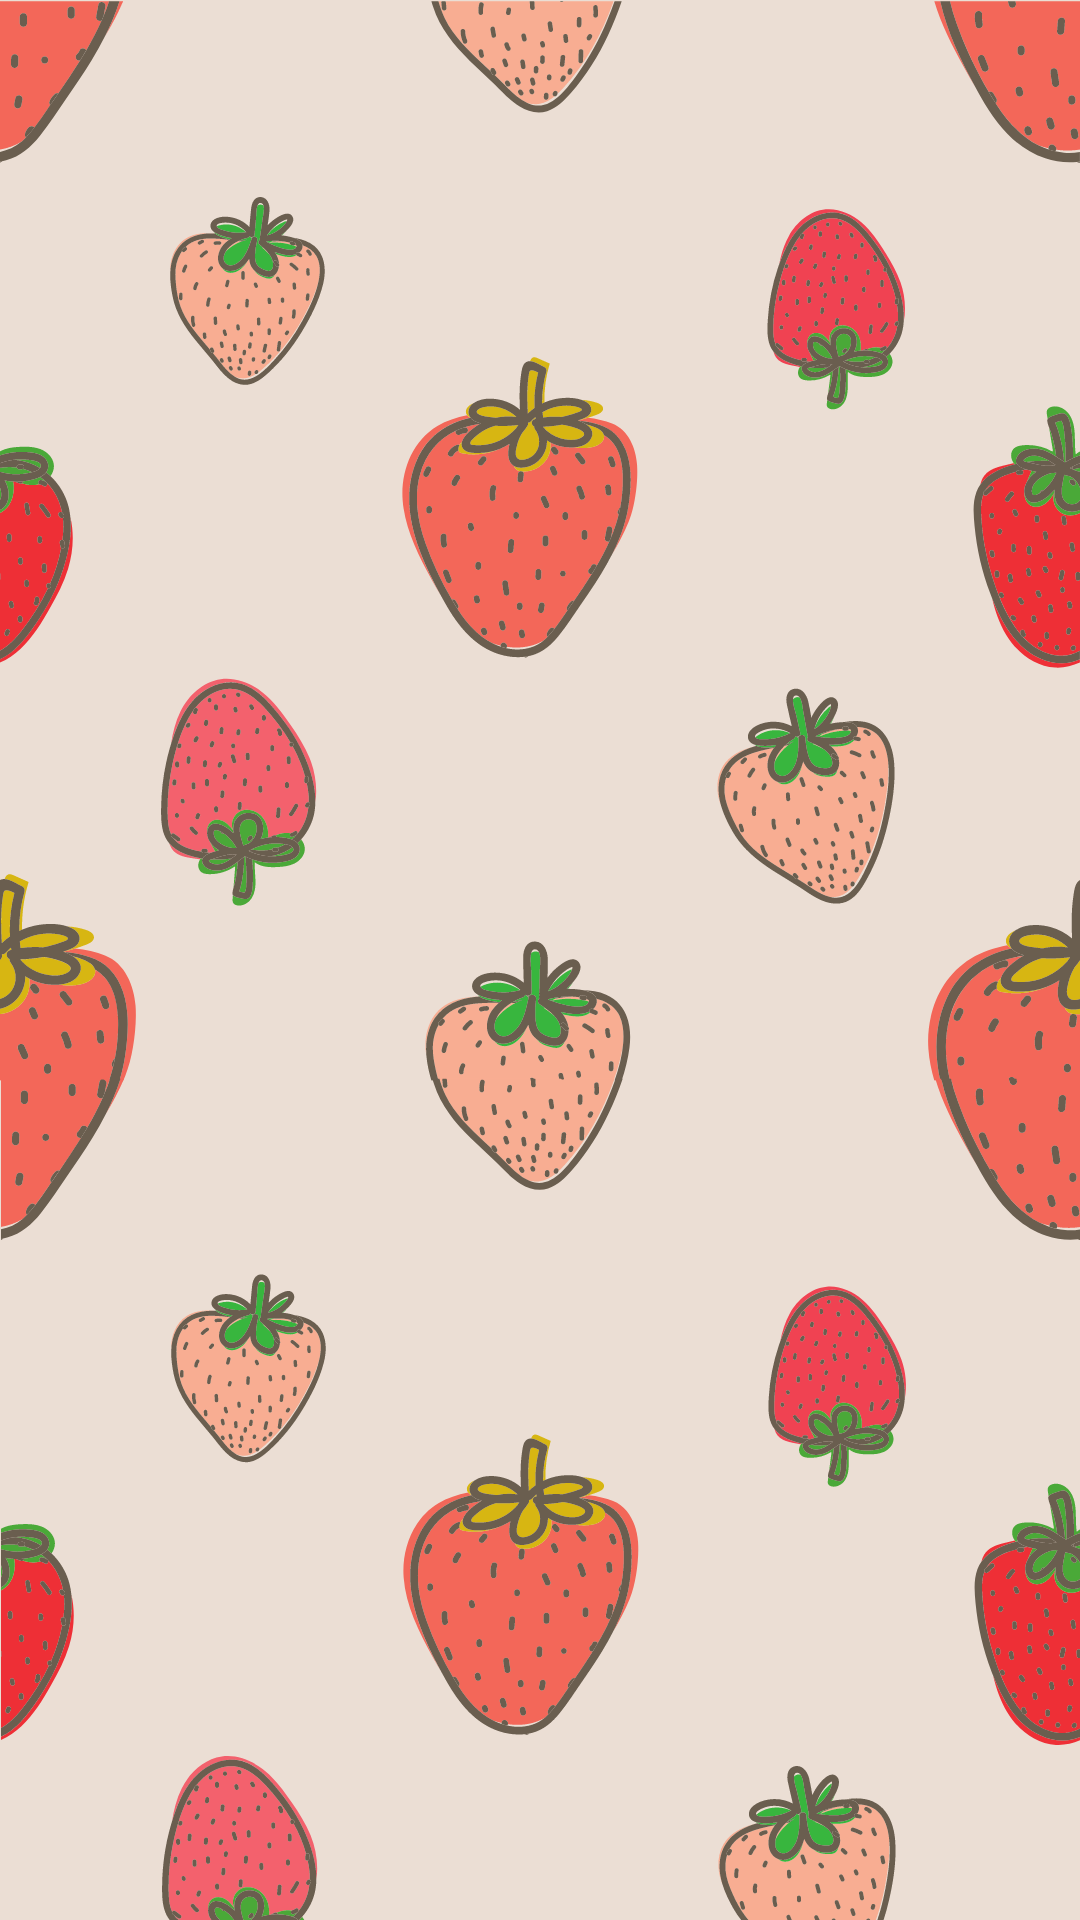 126865 Cute Strawberry Background Images Stock Photos  Vectors   Shutterstock